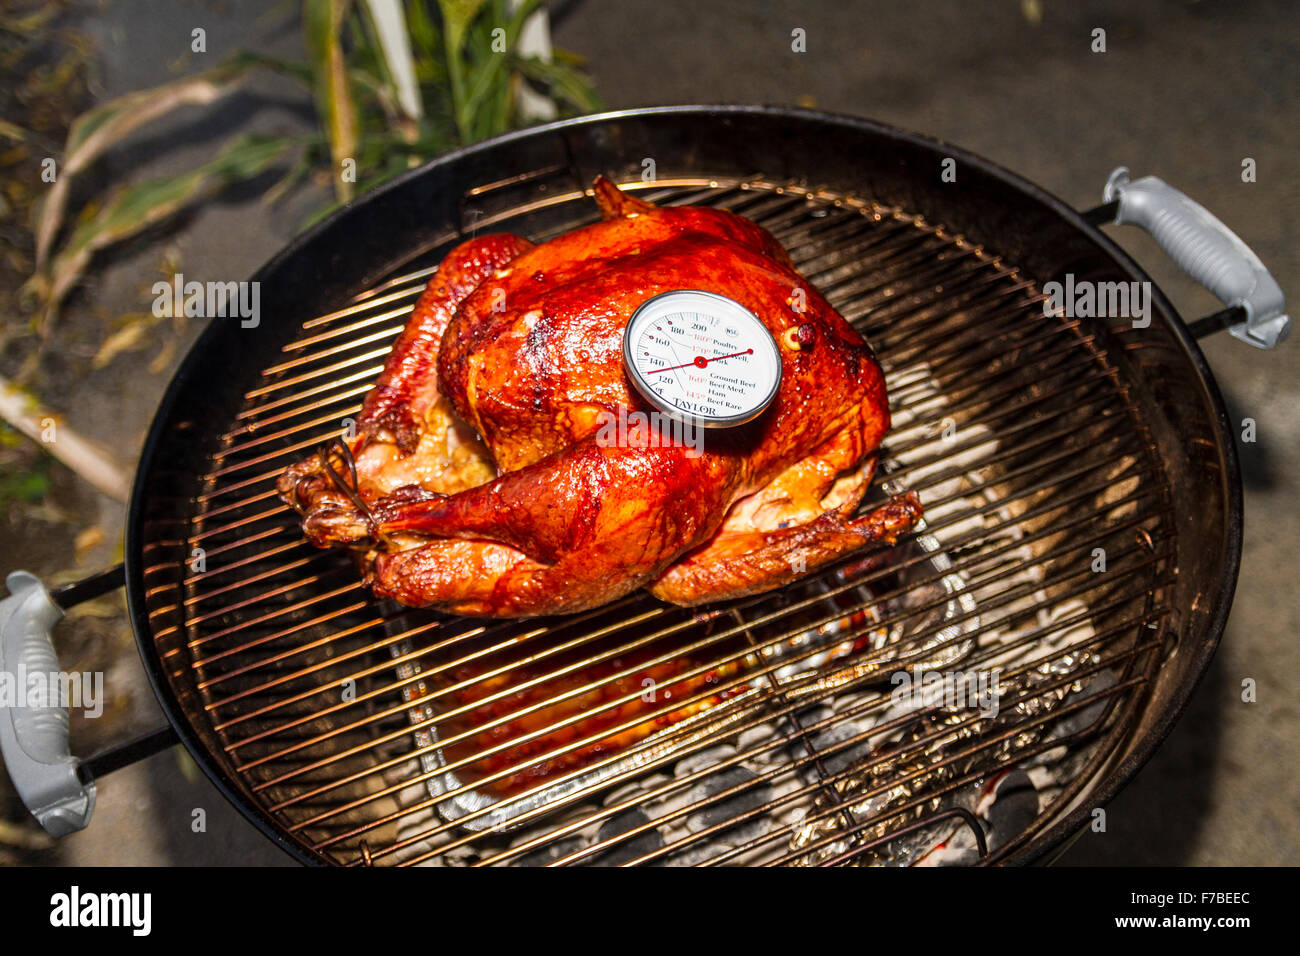 https://c8.alamy.com/comp/F7BEEC/a-salt-rub-brined-thanksgiving-turkey-cooked-on-a-weber-kettle-barbecue-F7BEEC.jpg